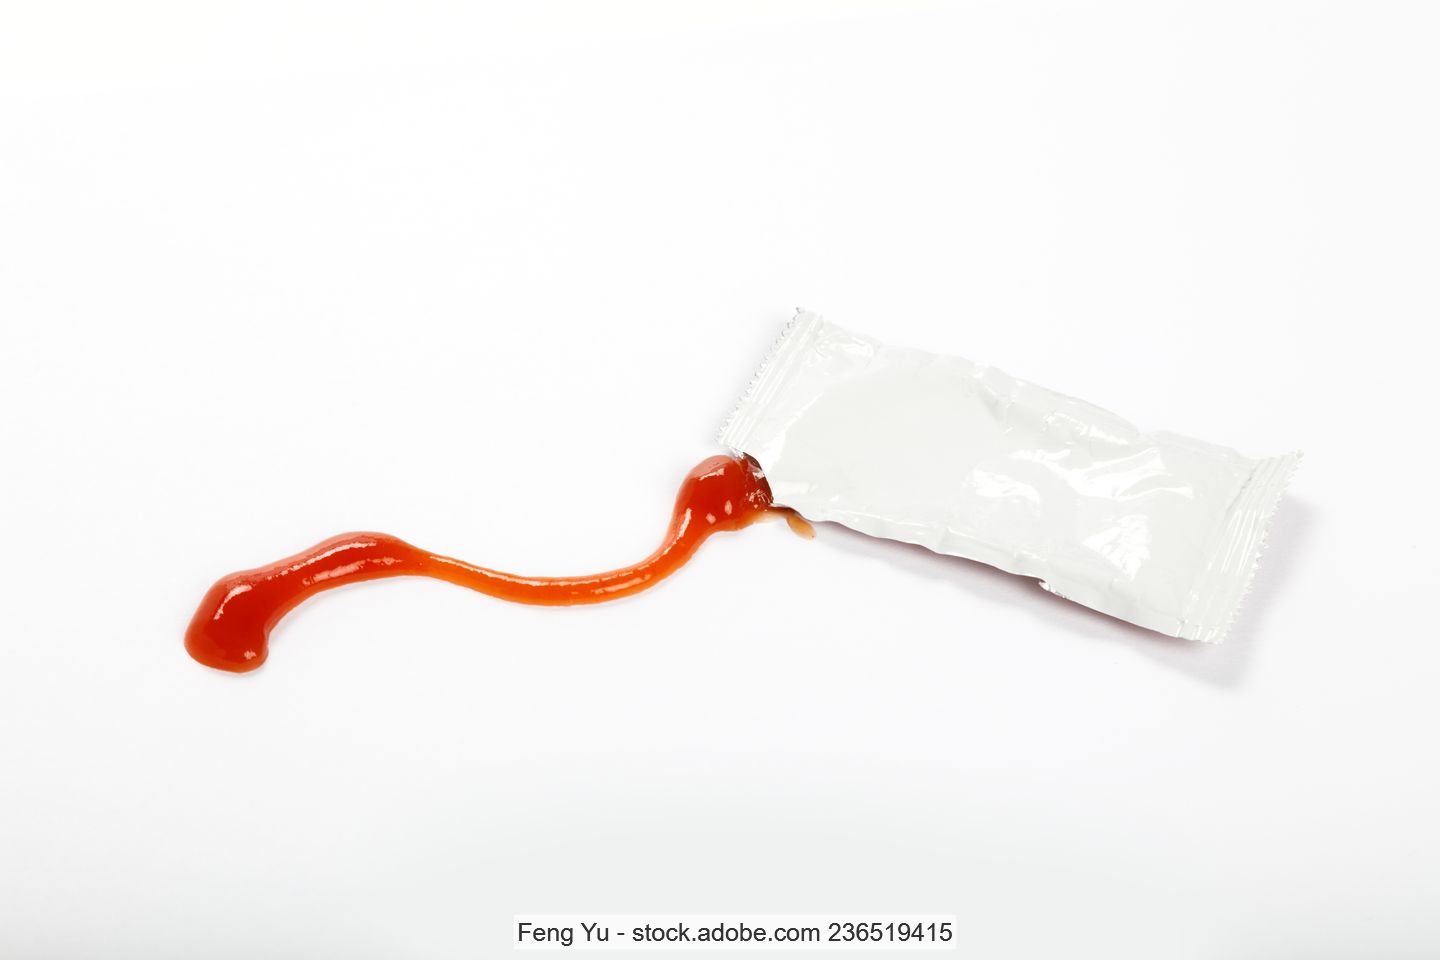 Single ketchup portion in an opened white plastic sachet.